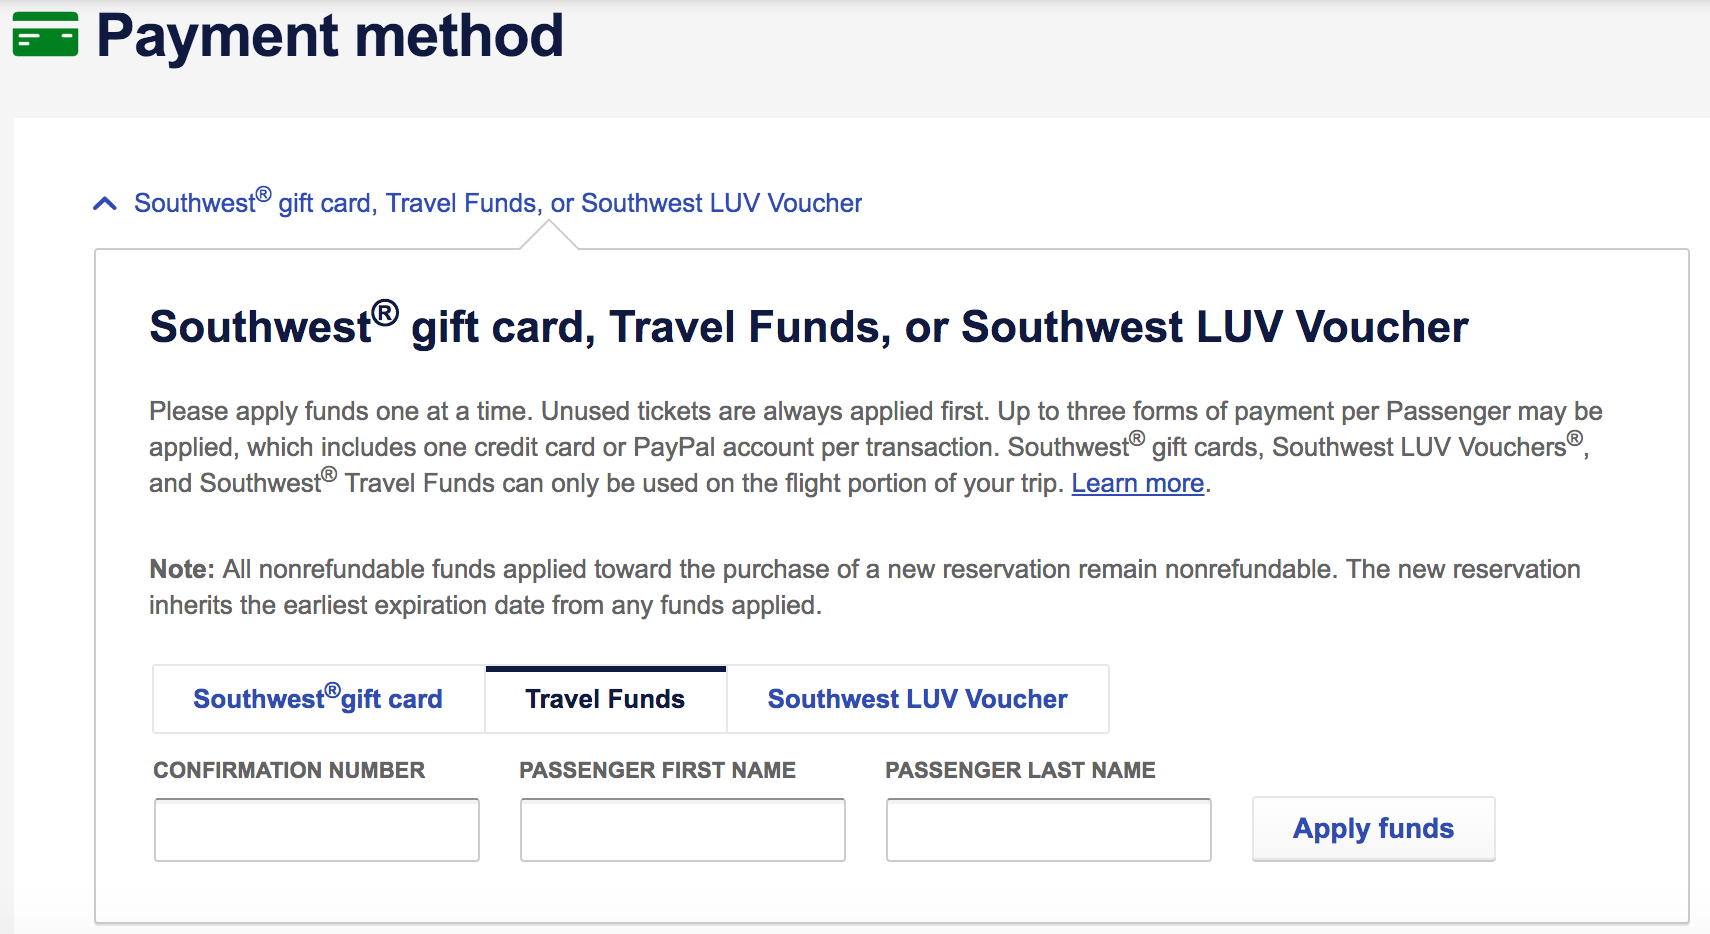 will southwest rebook on another airline